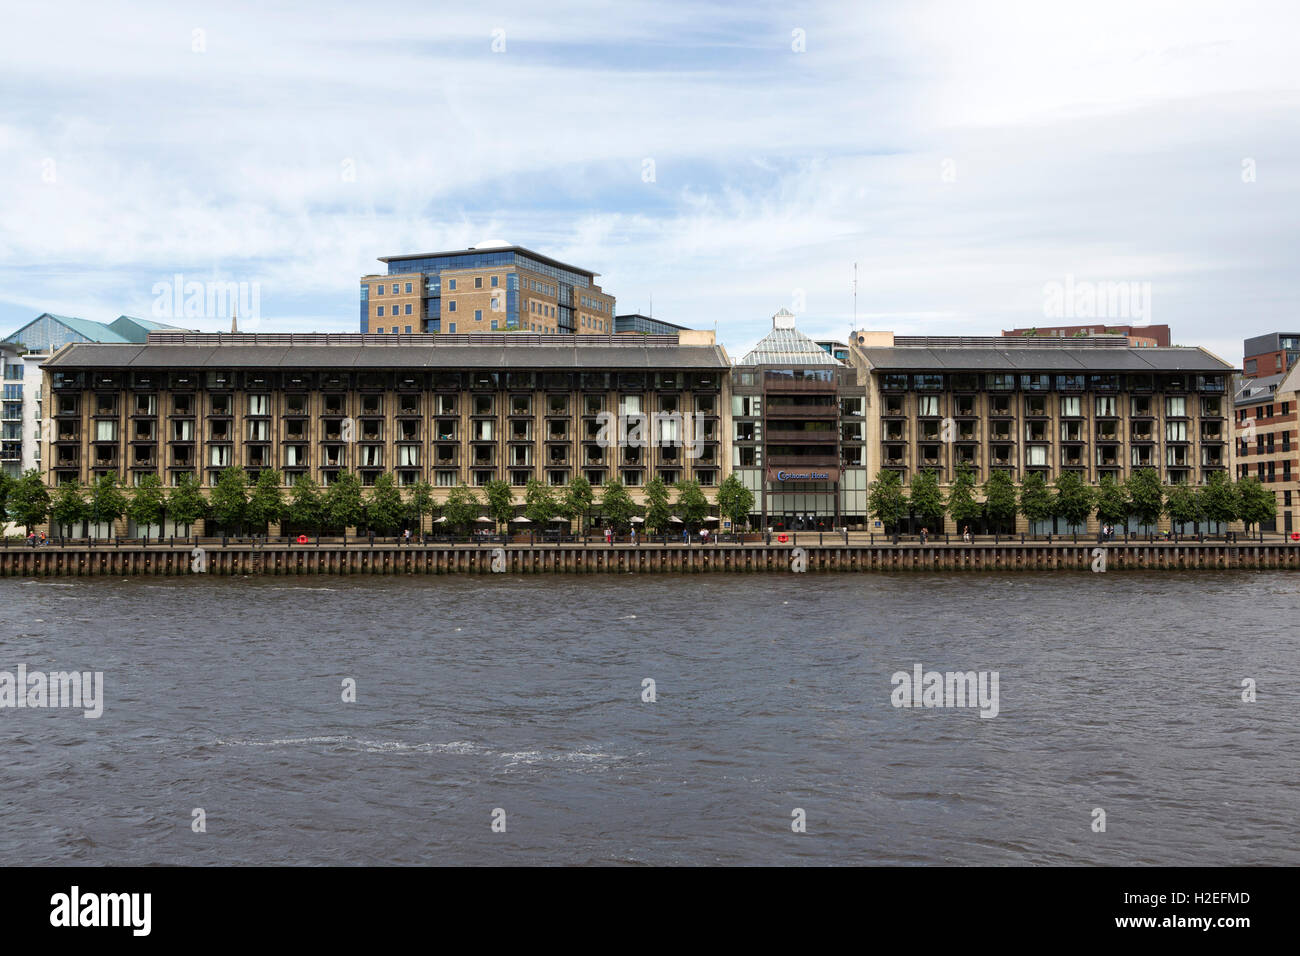 The Copthorne Hotel in Newcastle-upon-Tyne, England. The hotel overlooks the River Tyne. Stock Photo